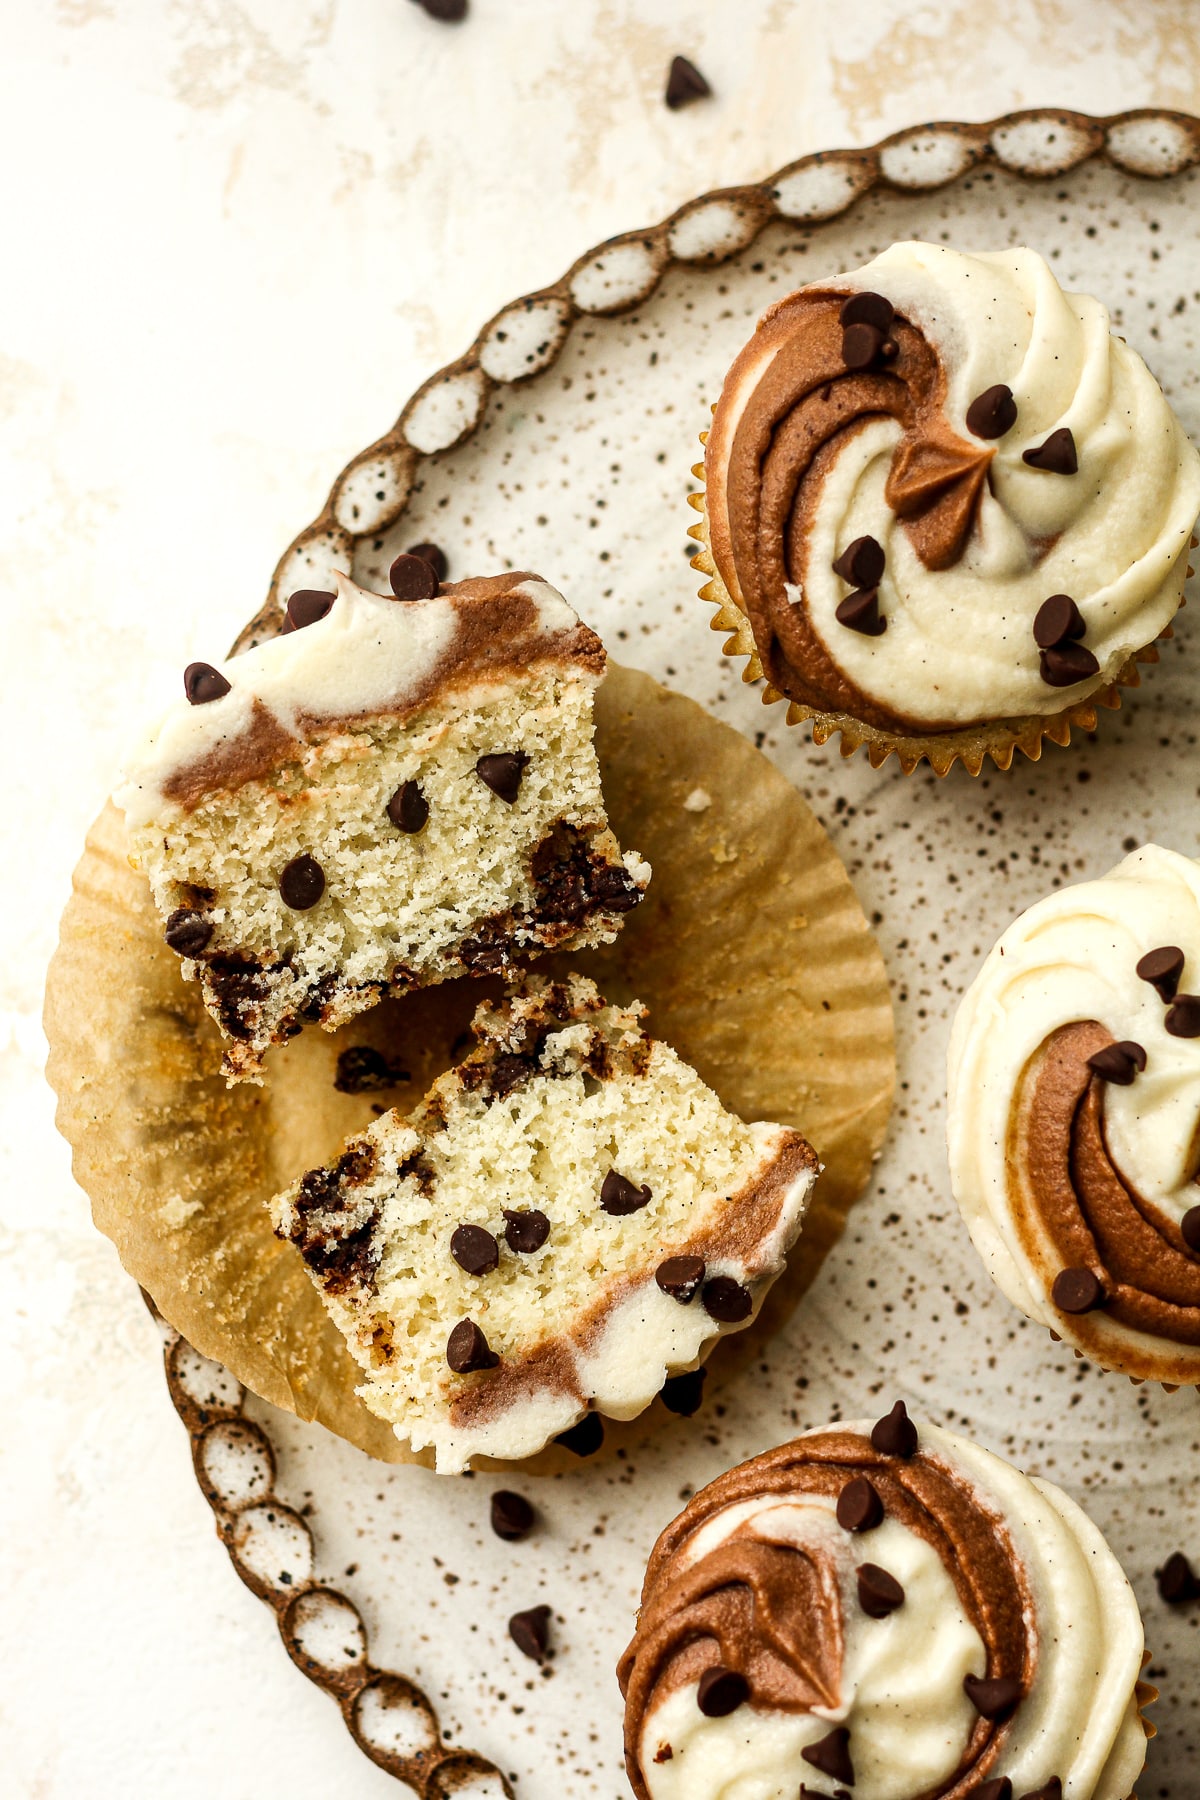 Overhead view of a plate of chocolate chip cupcakes with swirl buttercream.